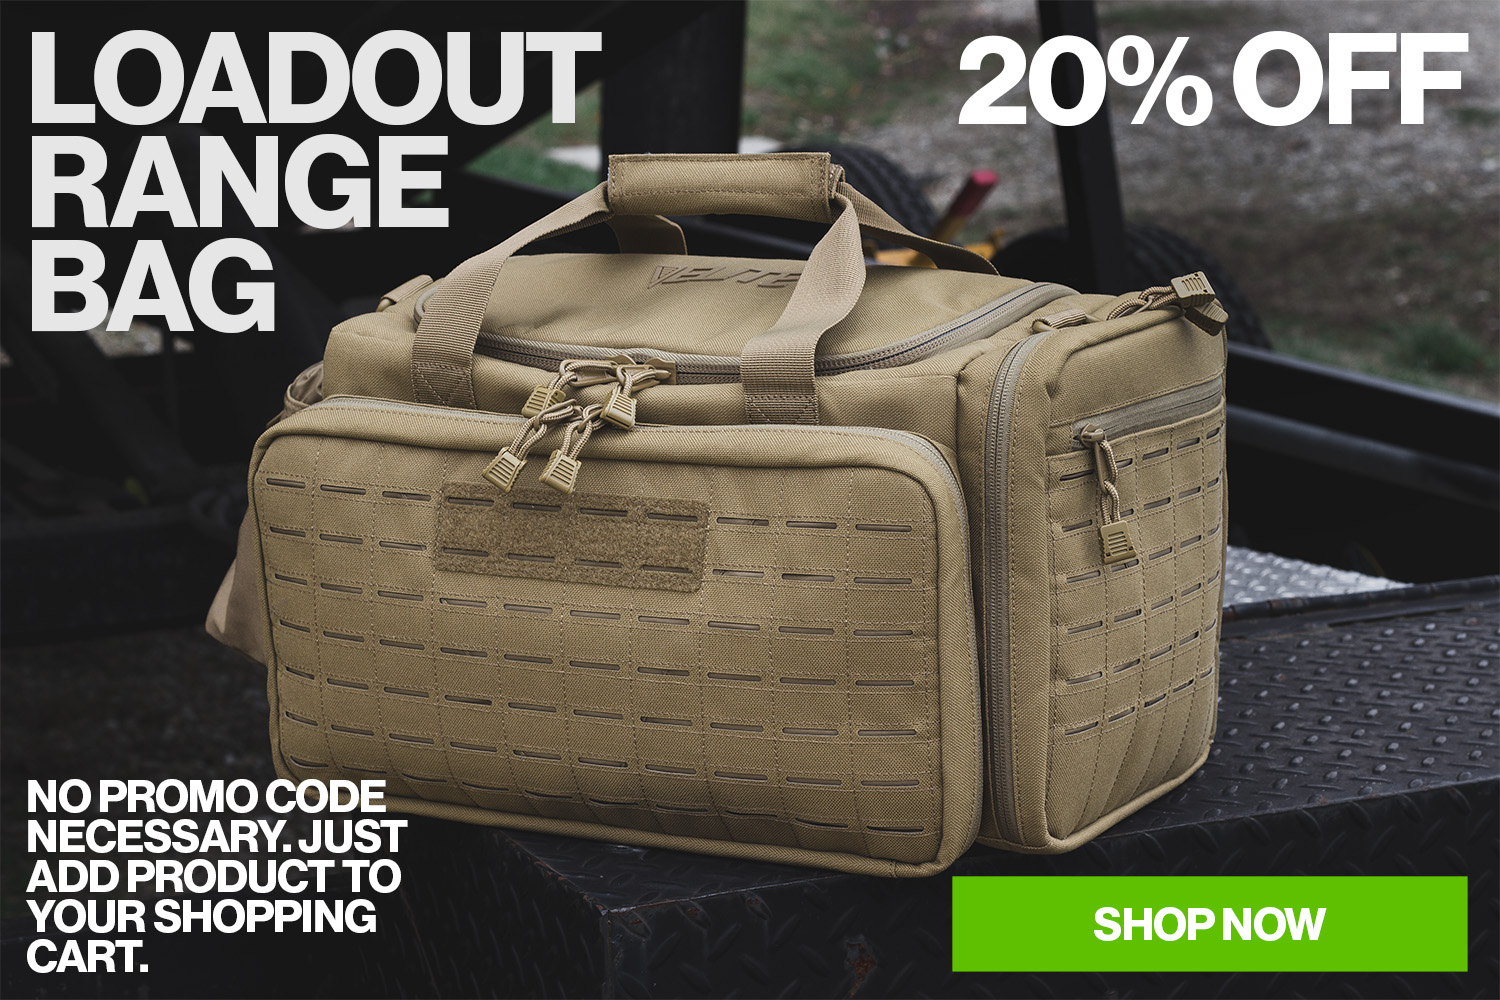 Loadout Range Bag: The perfect gift for the range enthusiast in your family.